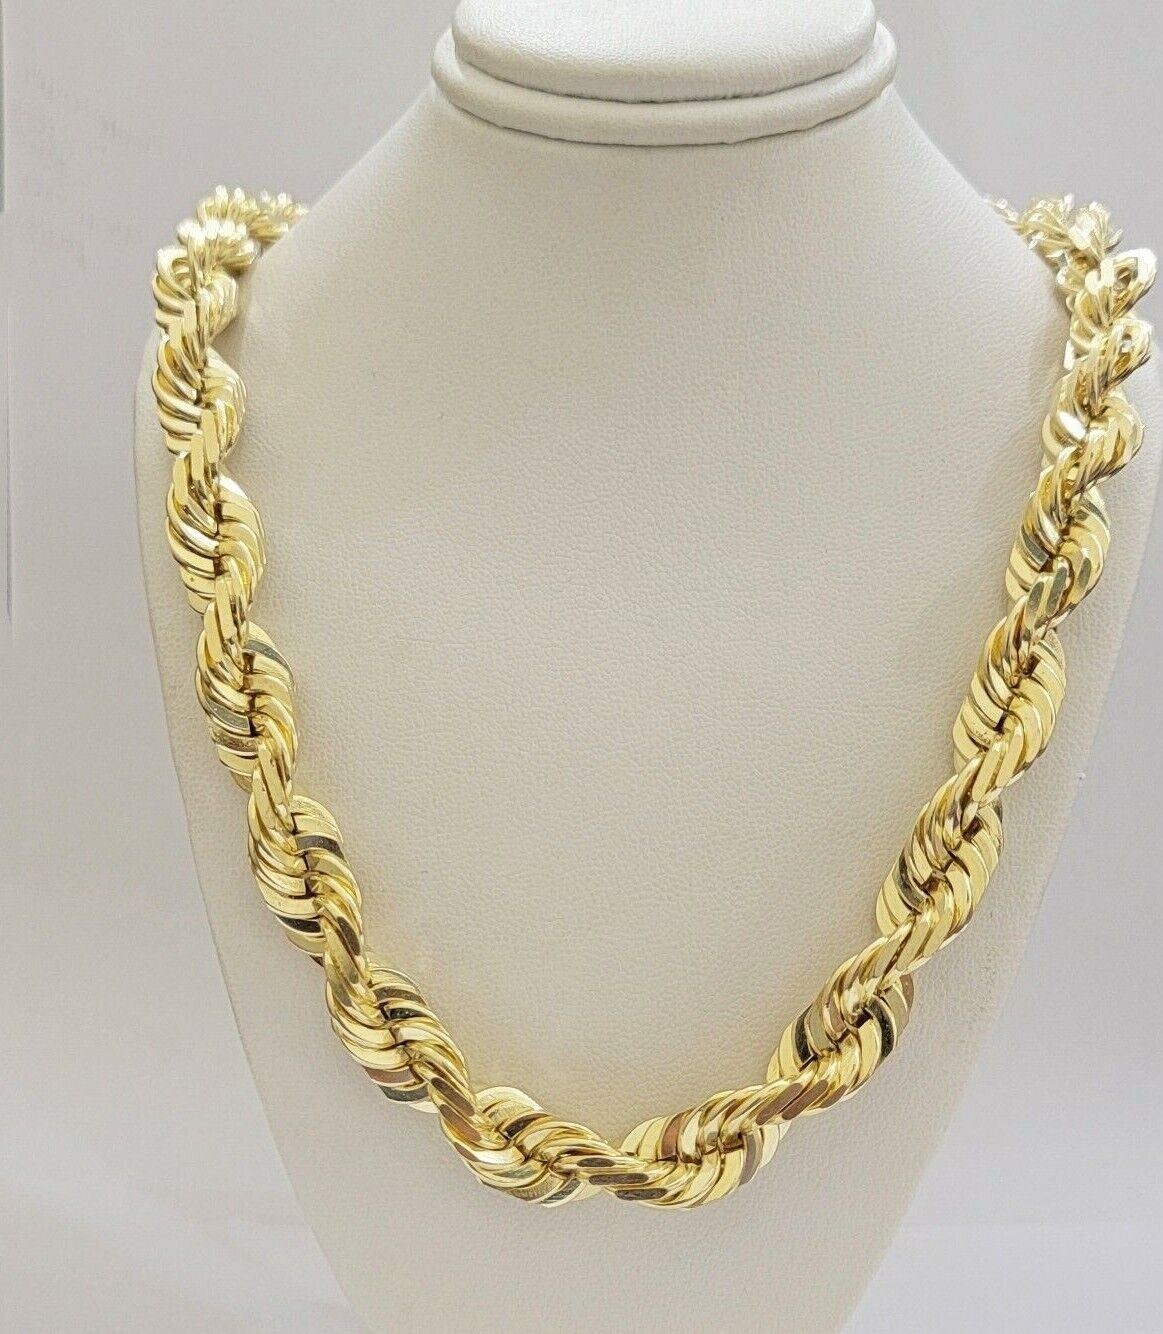 10k 14mm Solid Yellow Gold Rope Chain Necklace 28" Inch Mens Thick & Heavy Shiny